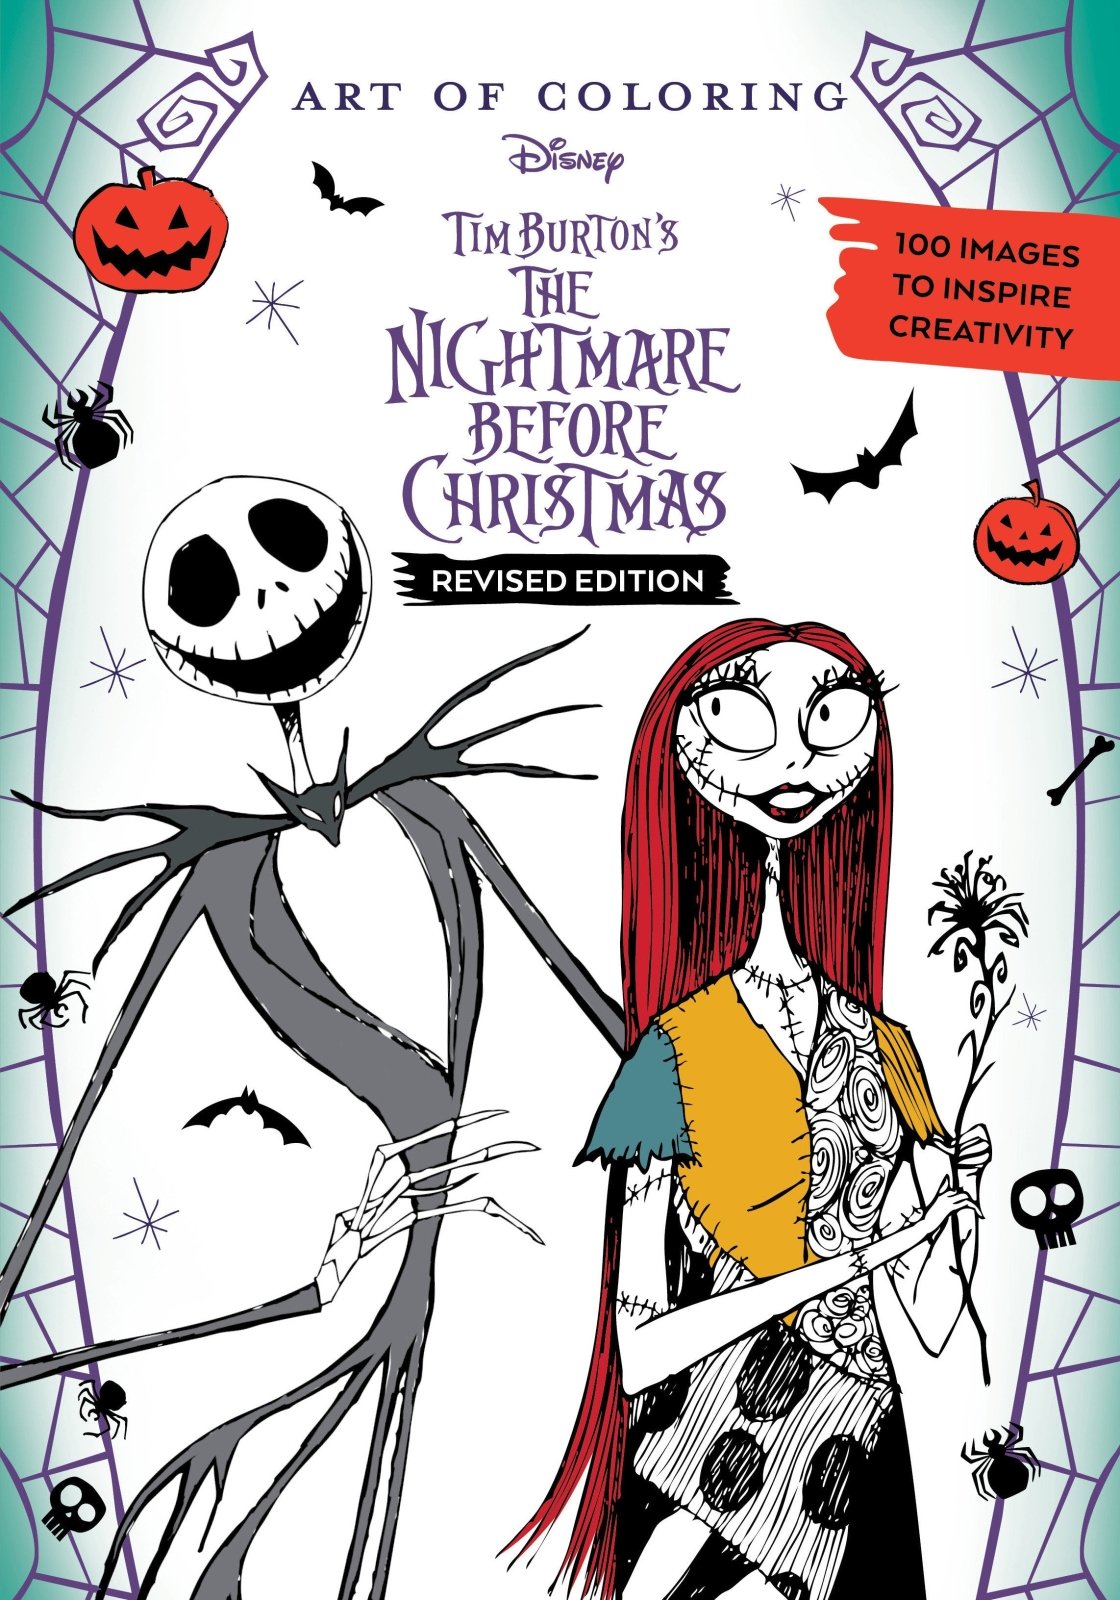 Art Of Coloring: Disney Tim Burton'S The Nightmare Before Christmas - The Fourth Place